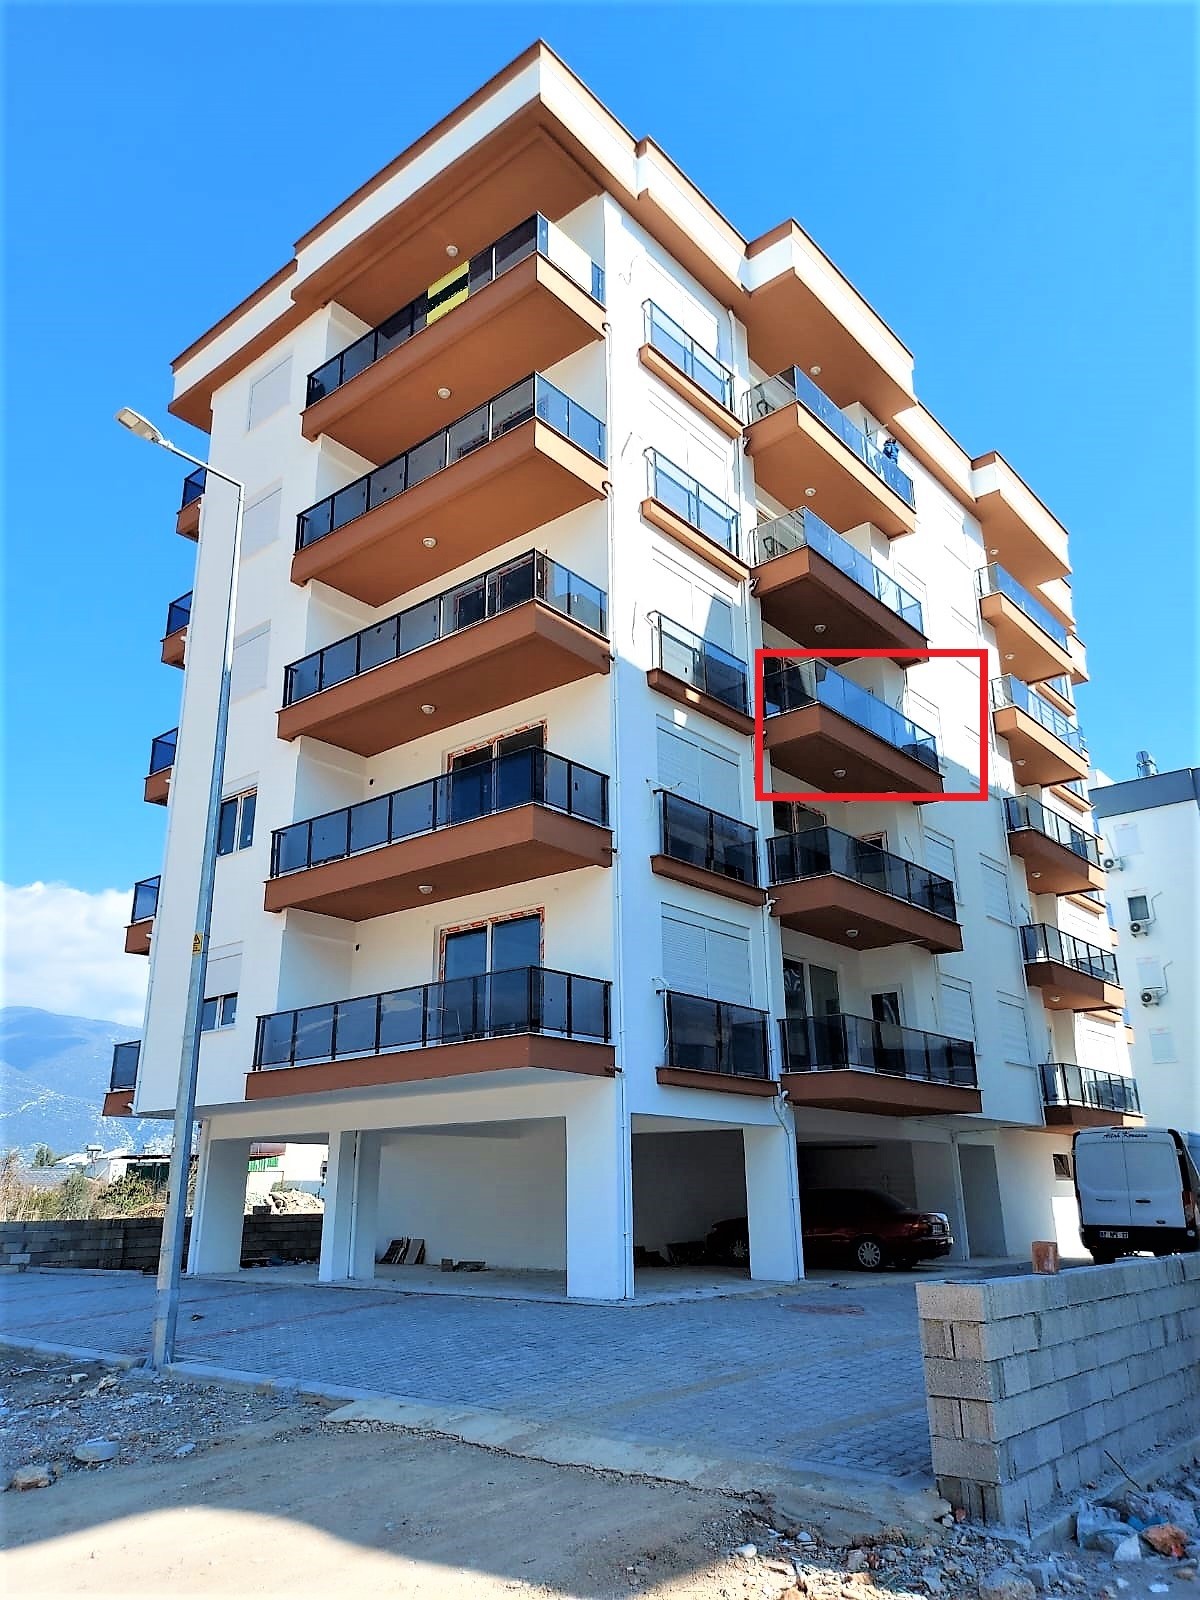 New one-bedroom apartment in a new house built in 2022 in the charming town of Finike. residence permit